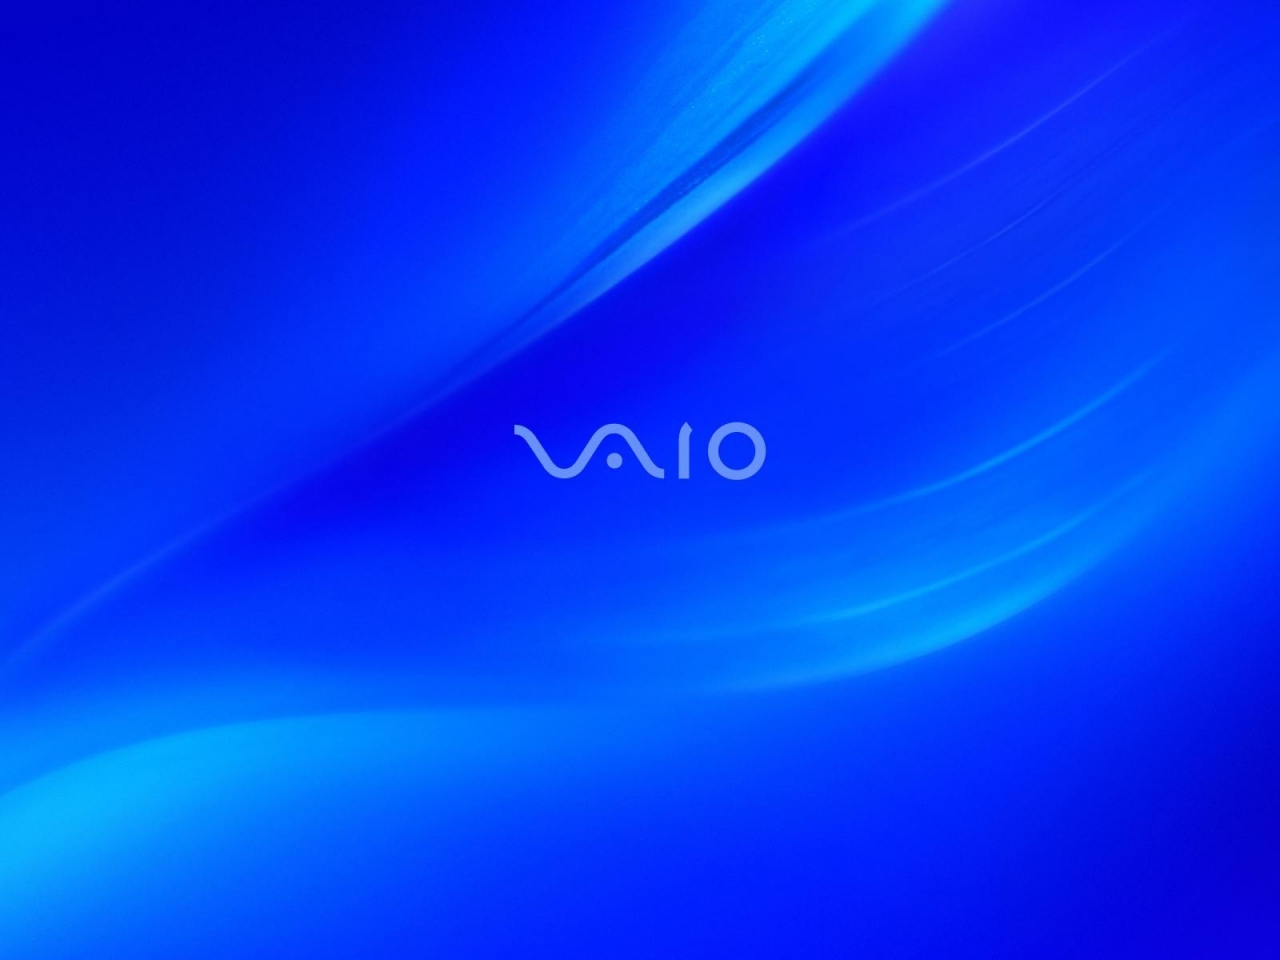 Sony Blue Vaio breeze for 1280 x 960 resolution